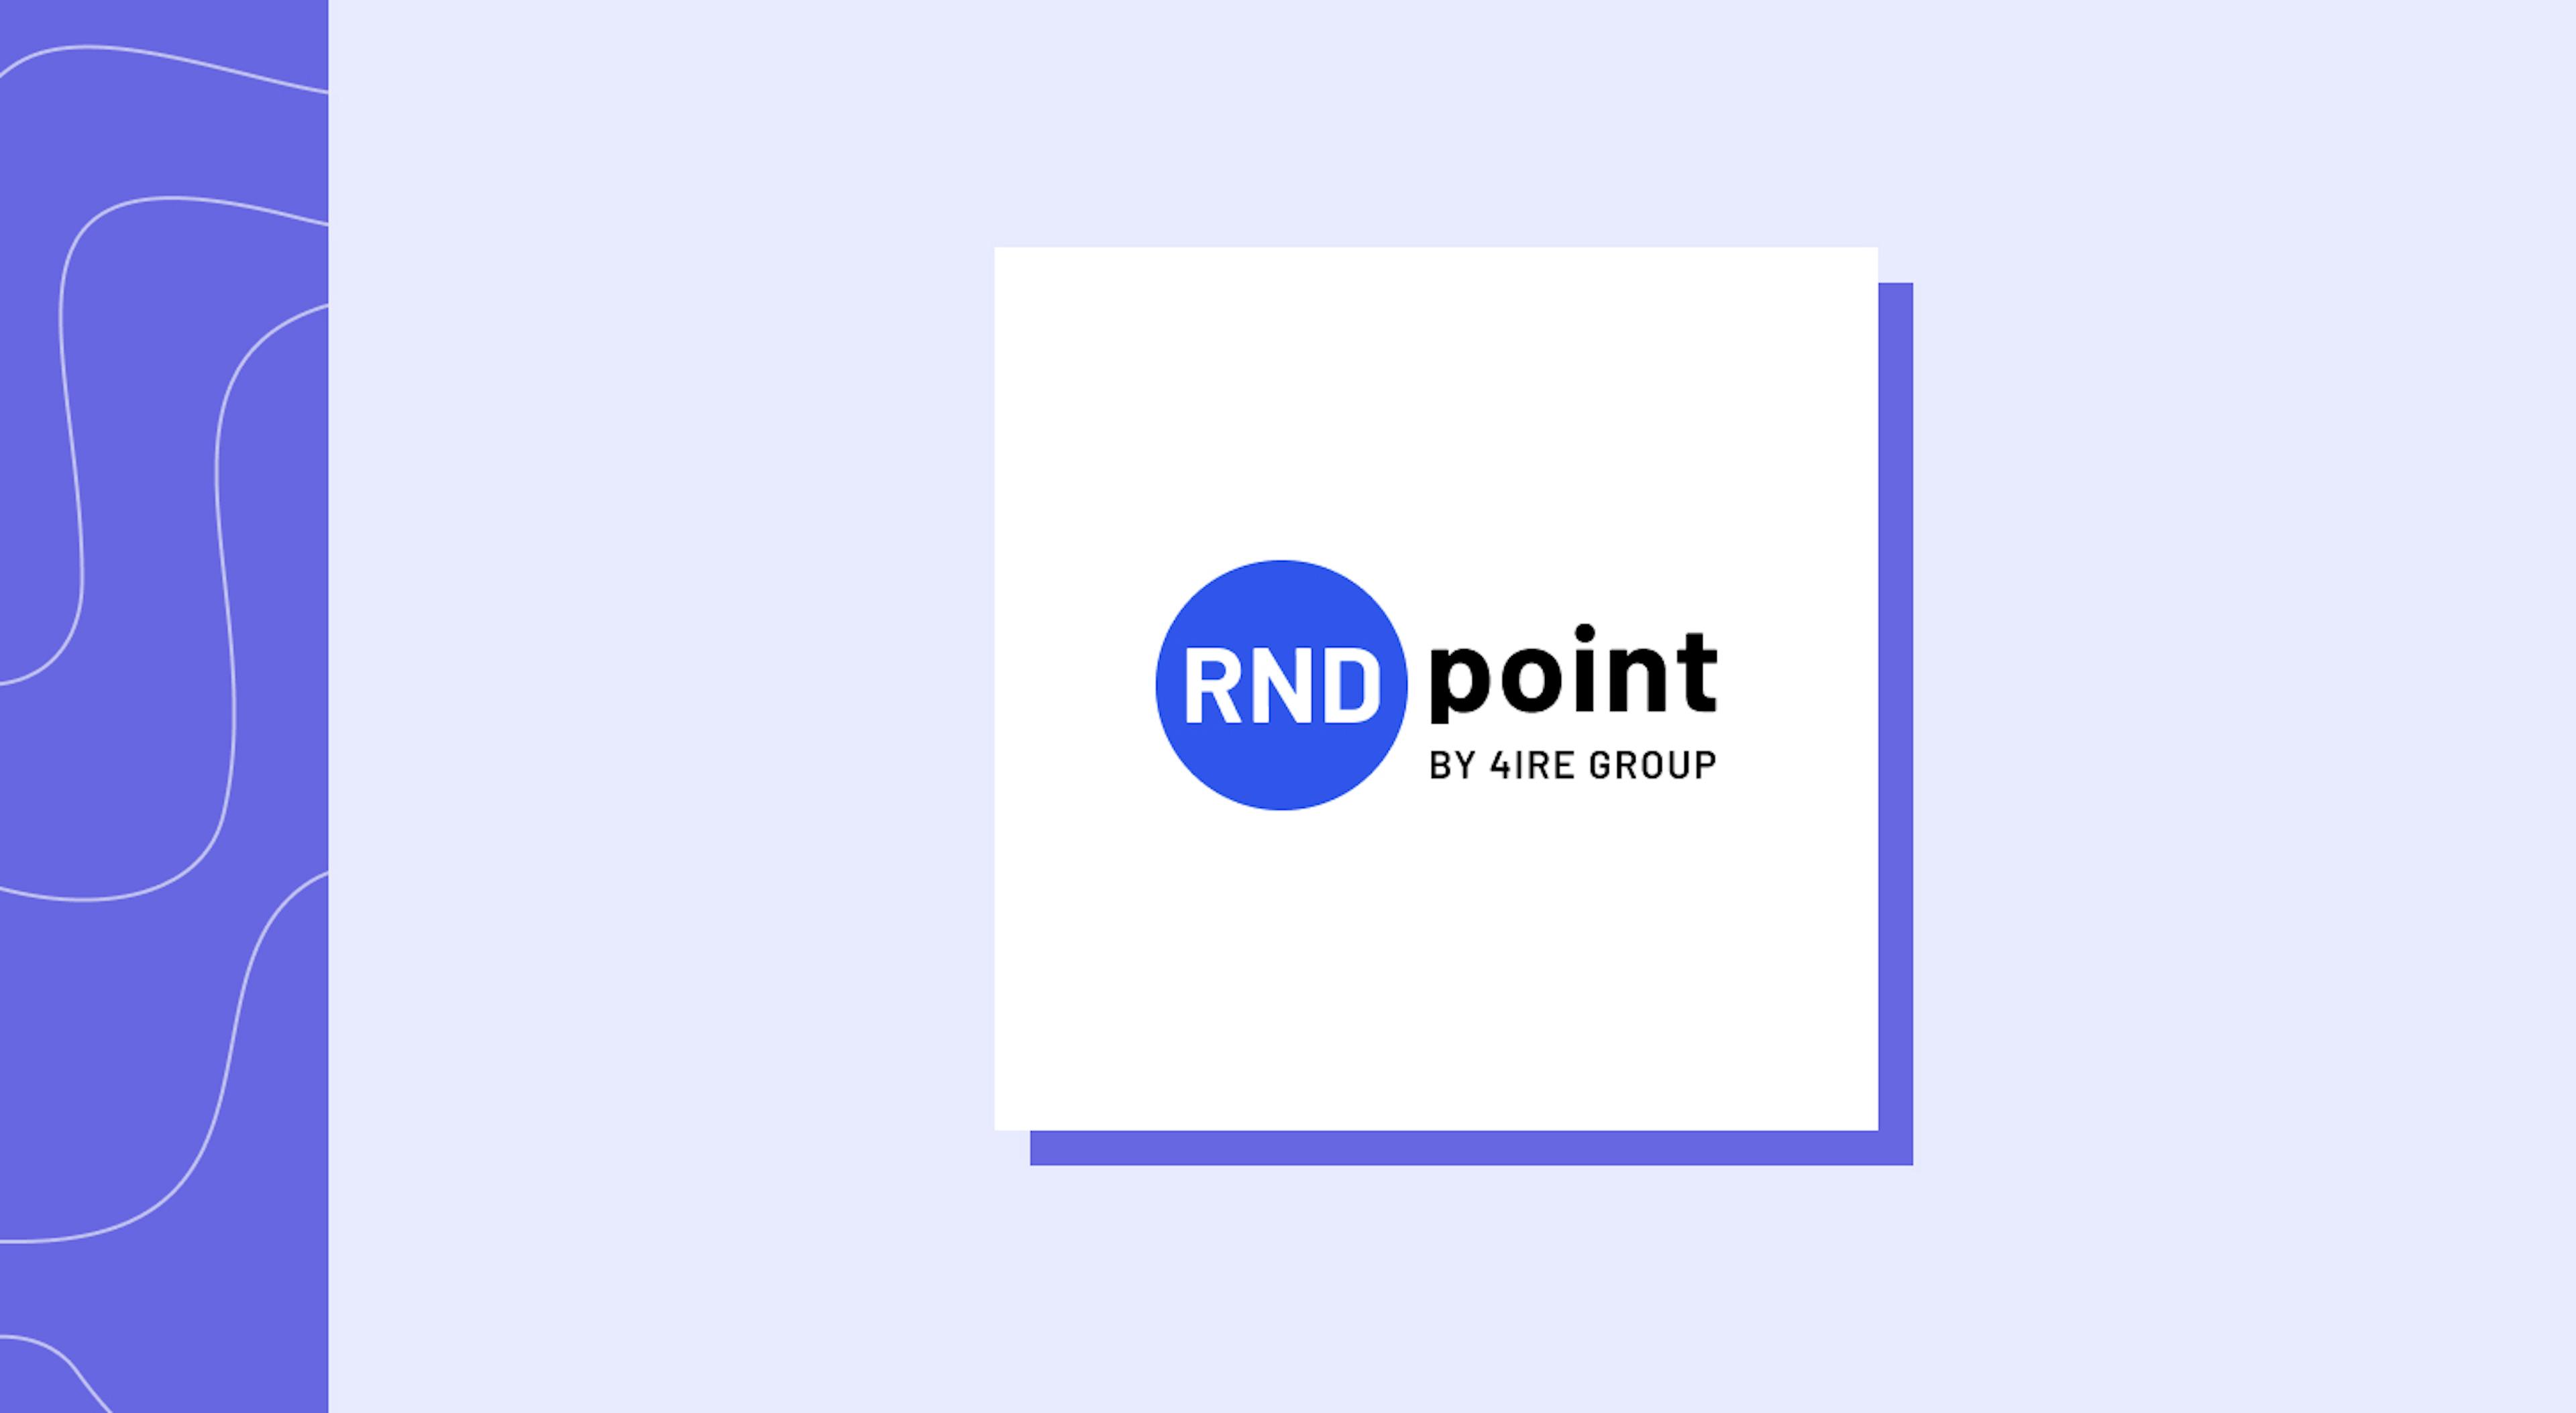 RNDpoint by 4IRE Group